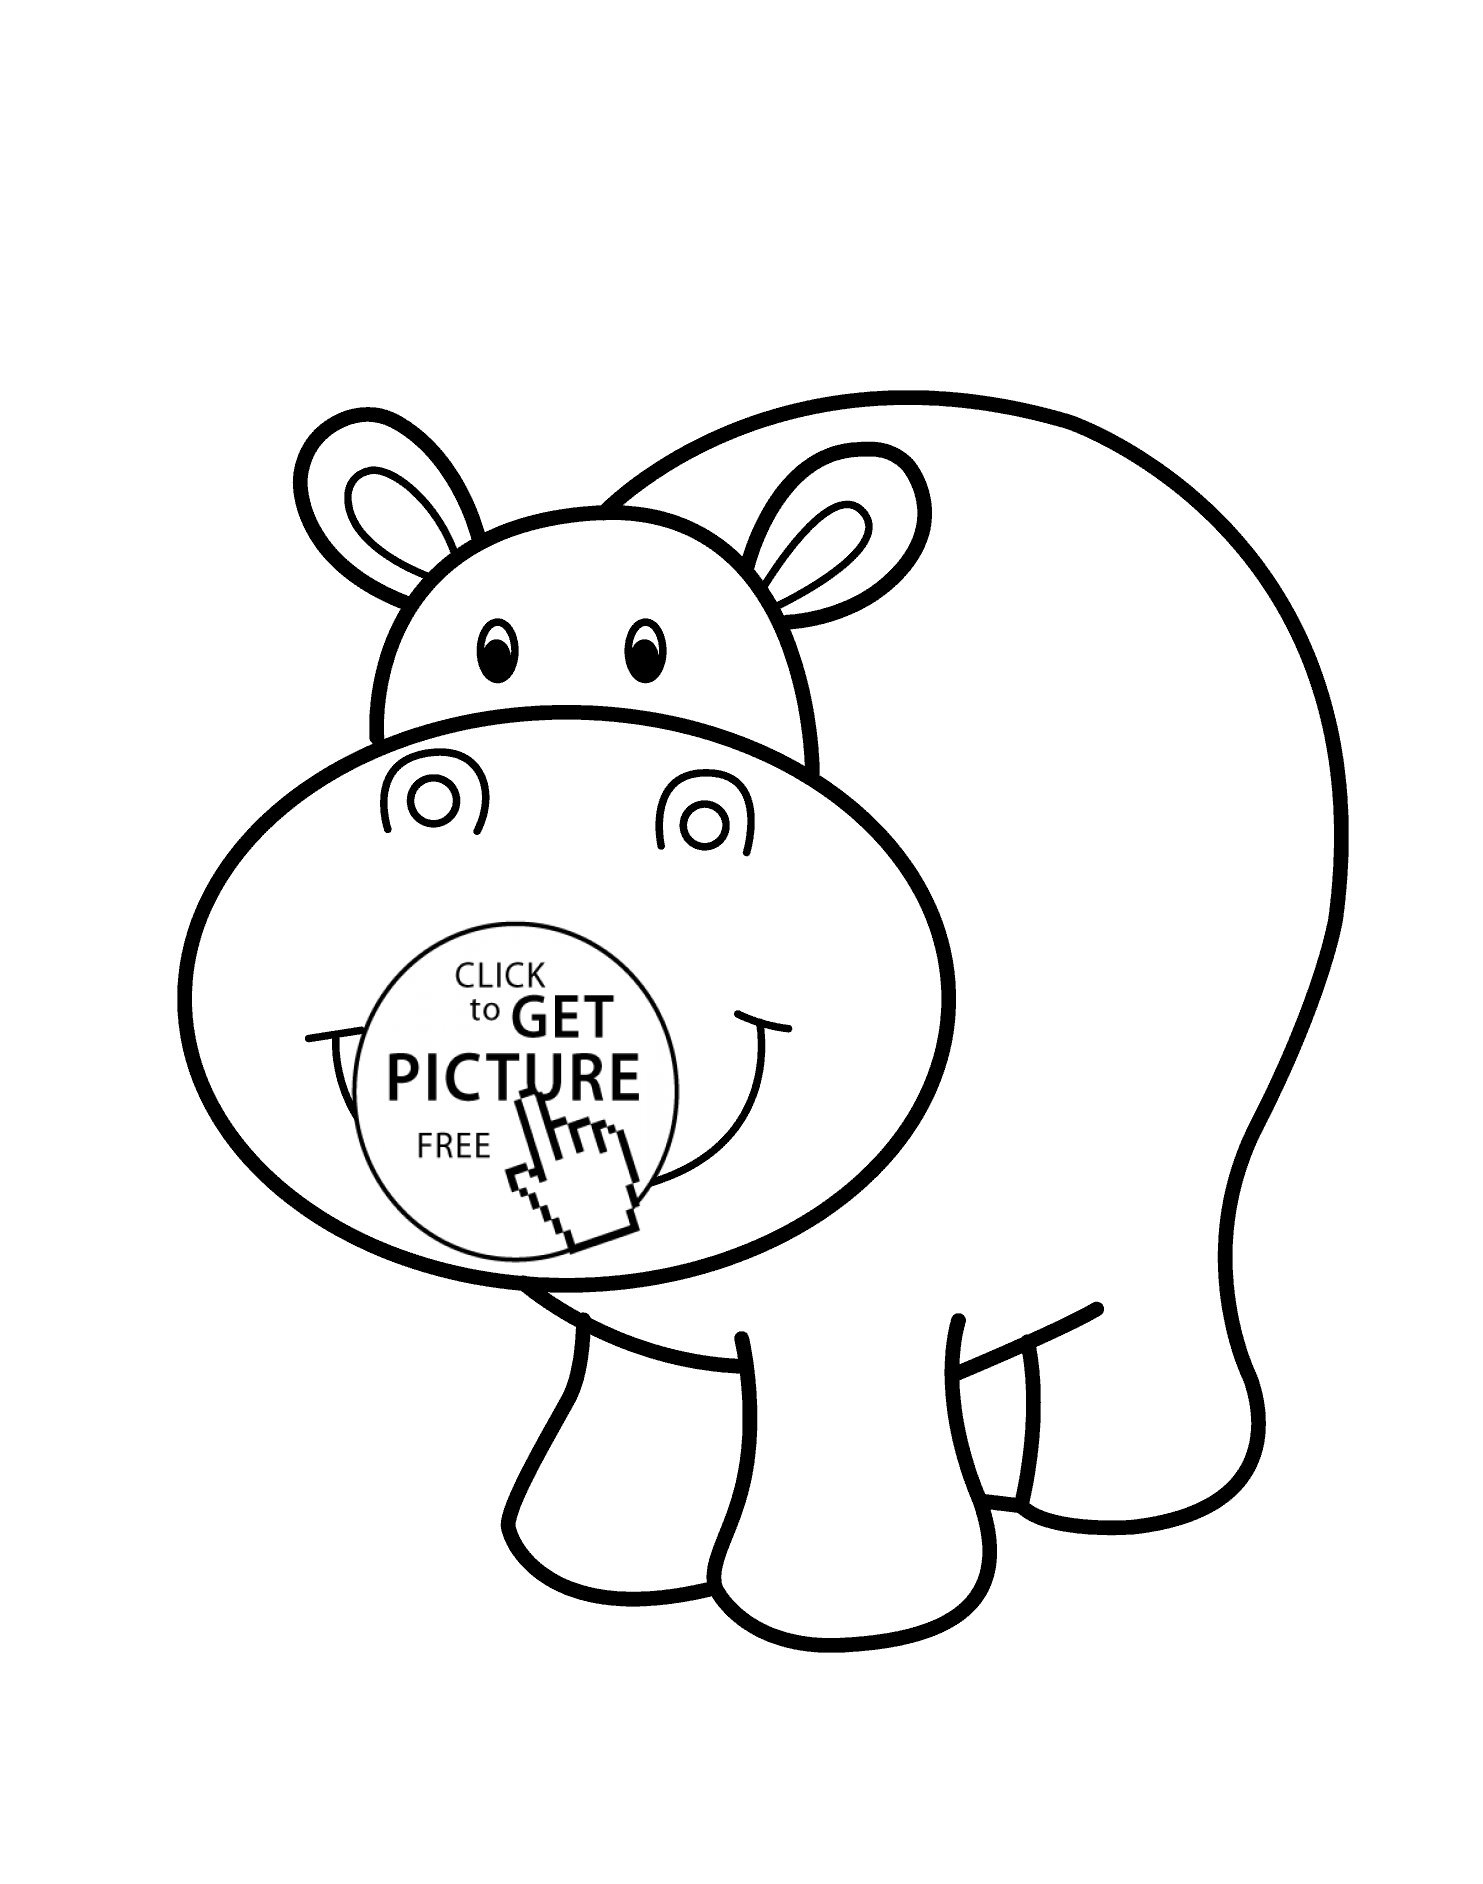 Hippo smiling - cartoon animals coloring pages for kids, printable ...